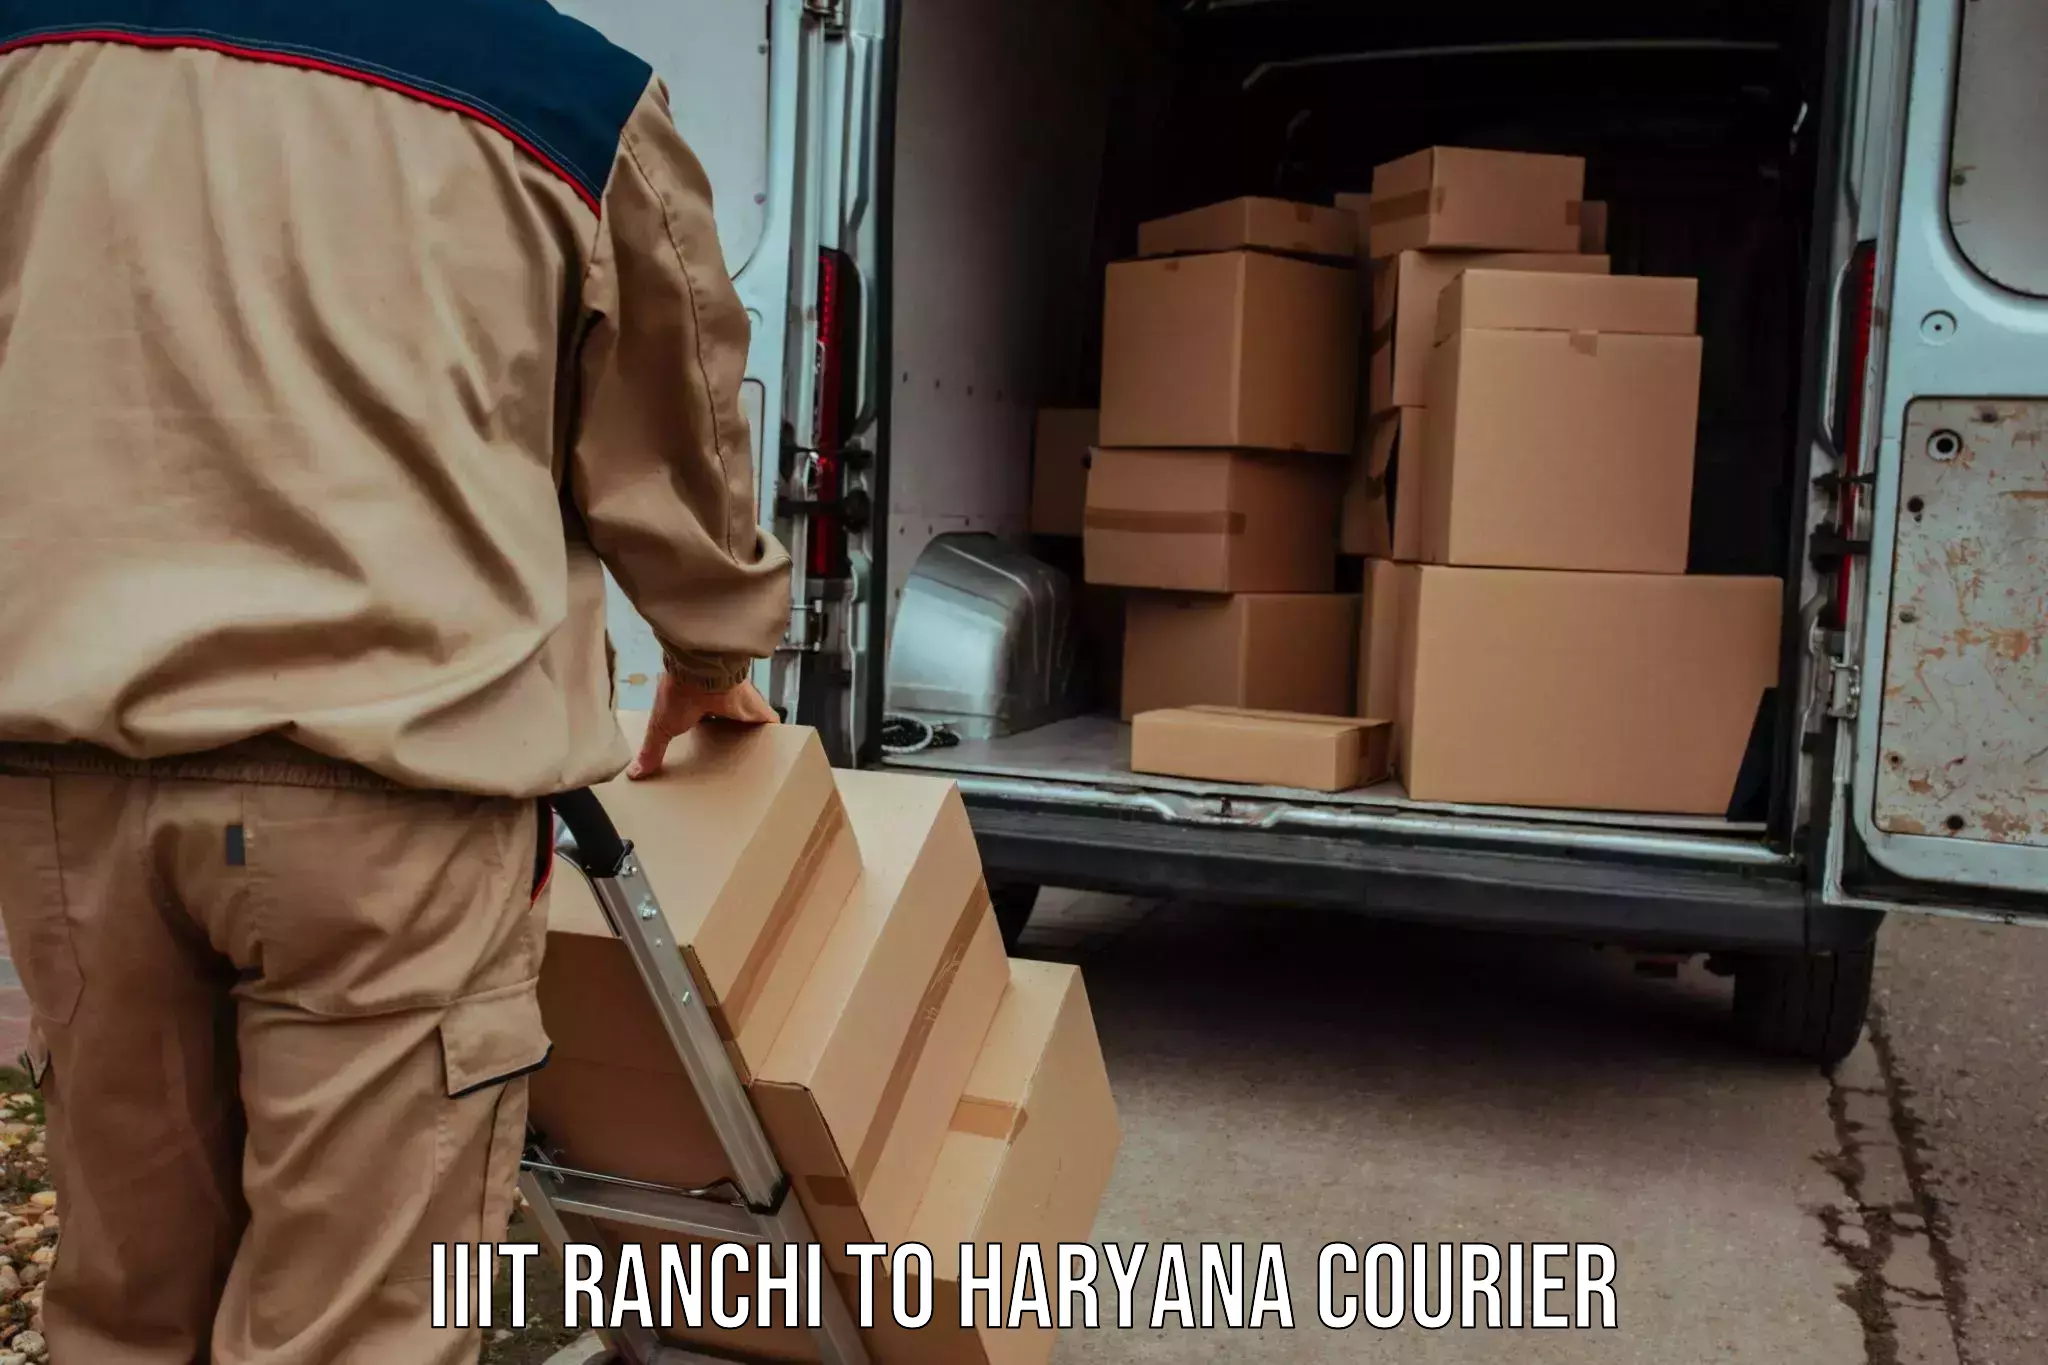 Affordable parcel service IIIT Ranchi to NCR Haryana